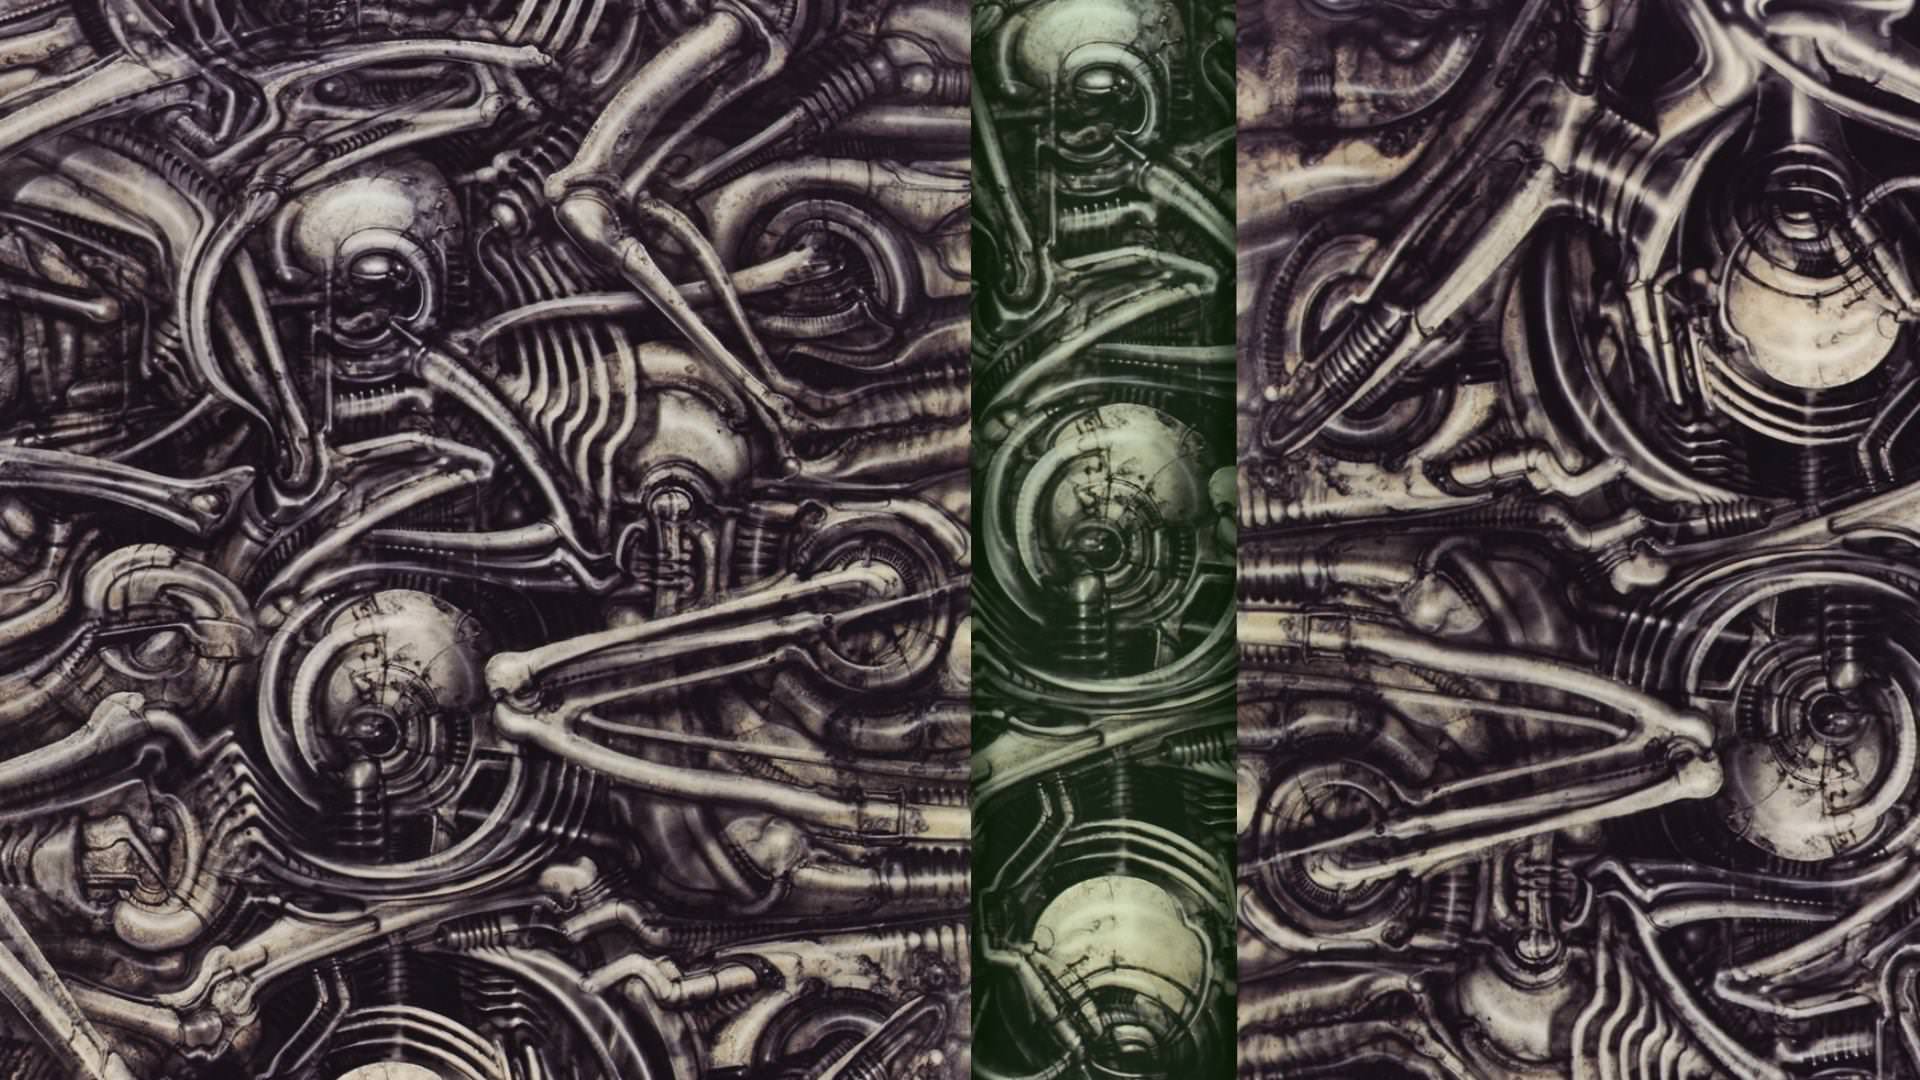 I made a colour changing wallpaper from HR Giger's work That is if